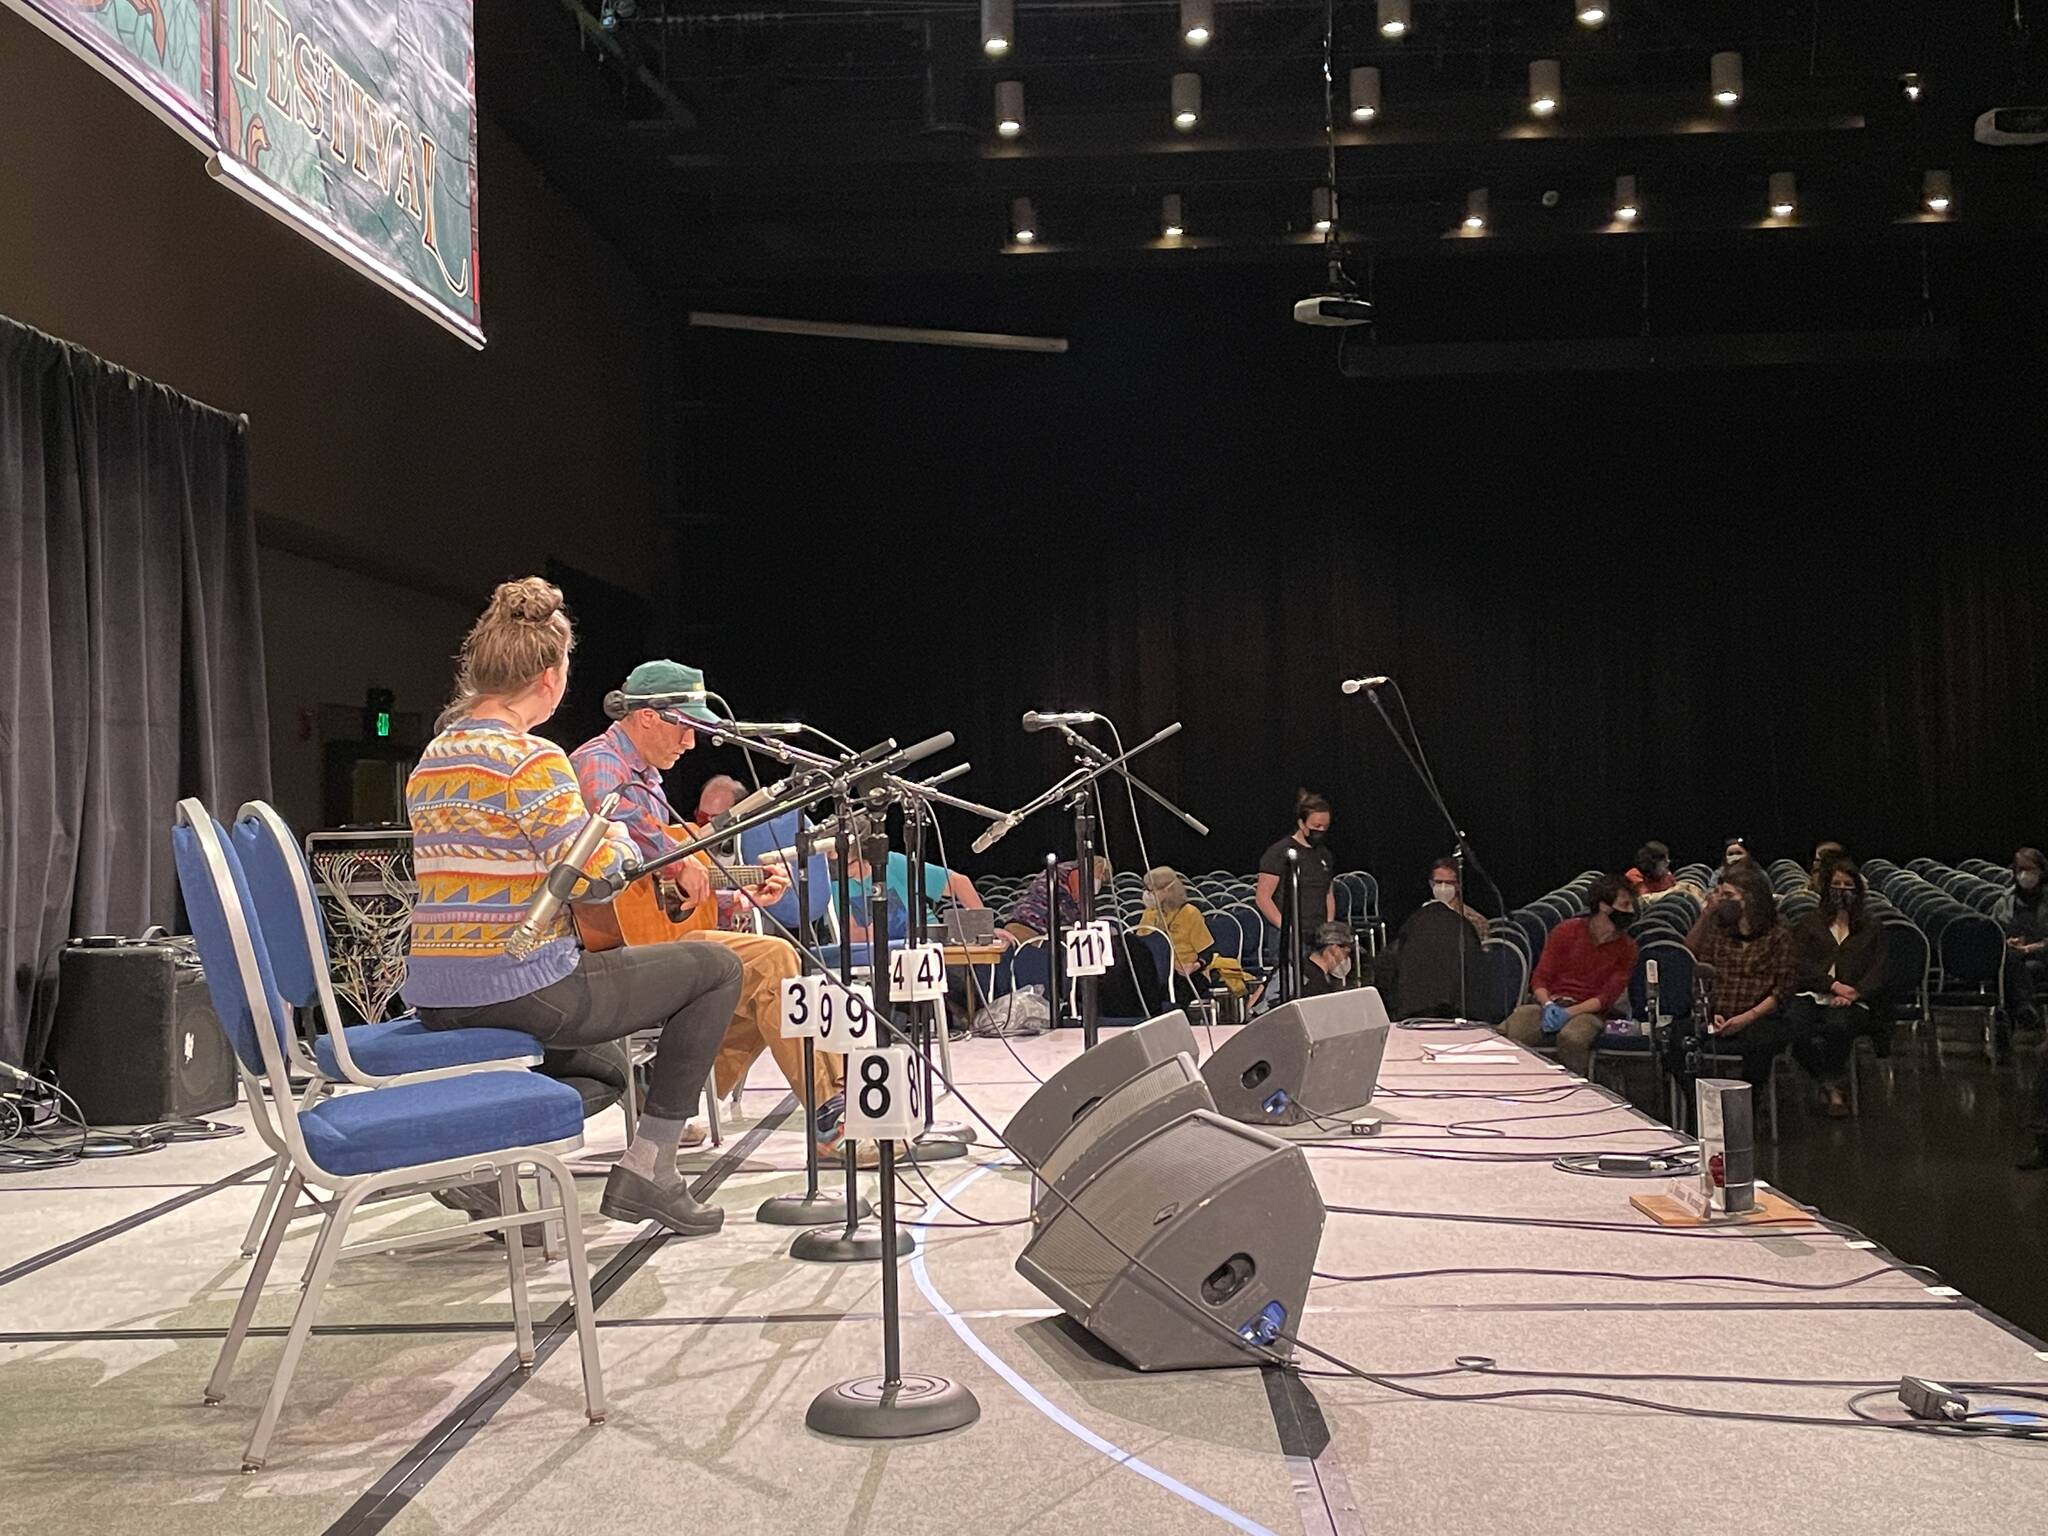 Juneau band The Breeze, made up of Charles Kiel Renick, Olivia Sinaiko and Bob Sinaiko, prepare to play their set at Centennial Hall during the 2022 Alaska Folk Fest on April 4, 2022. This year’s festival takes place on April 10-16. (Michael S. Lockett / Juneau Empire file)